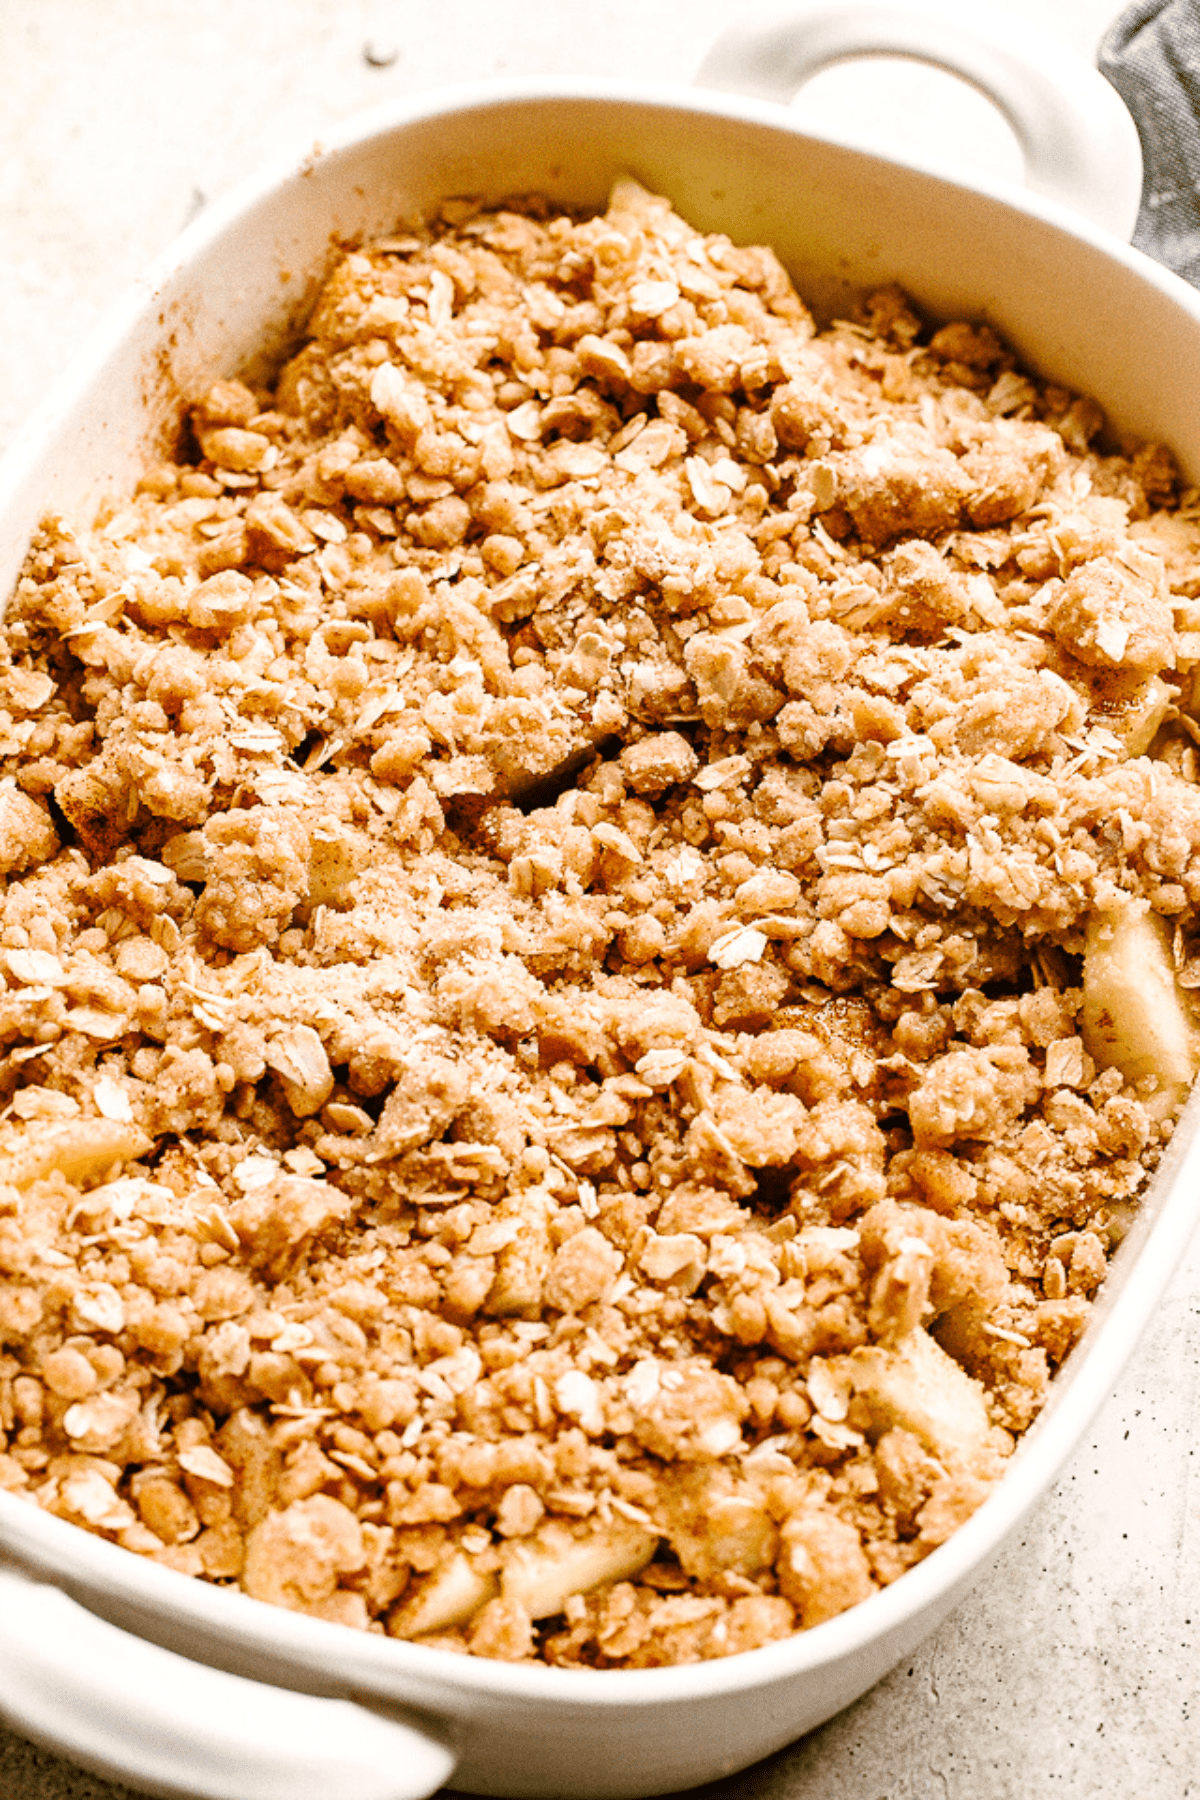 Best Apple Crumble Recipe | How to Make Apple Crumble